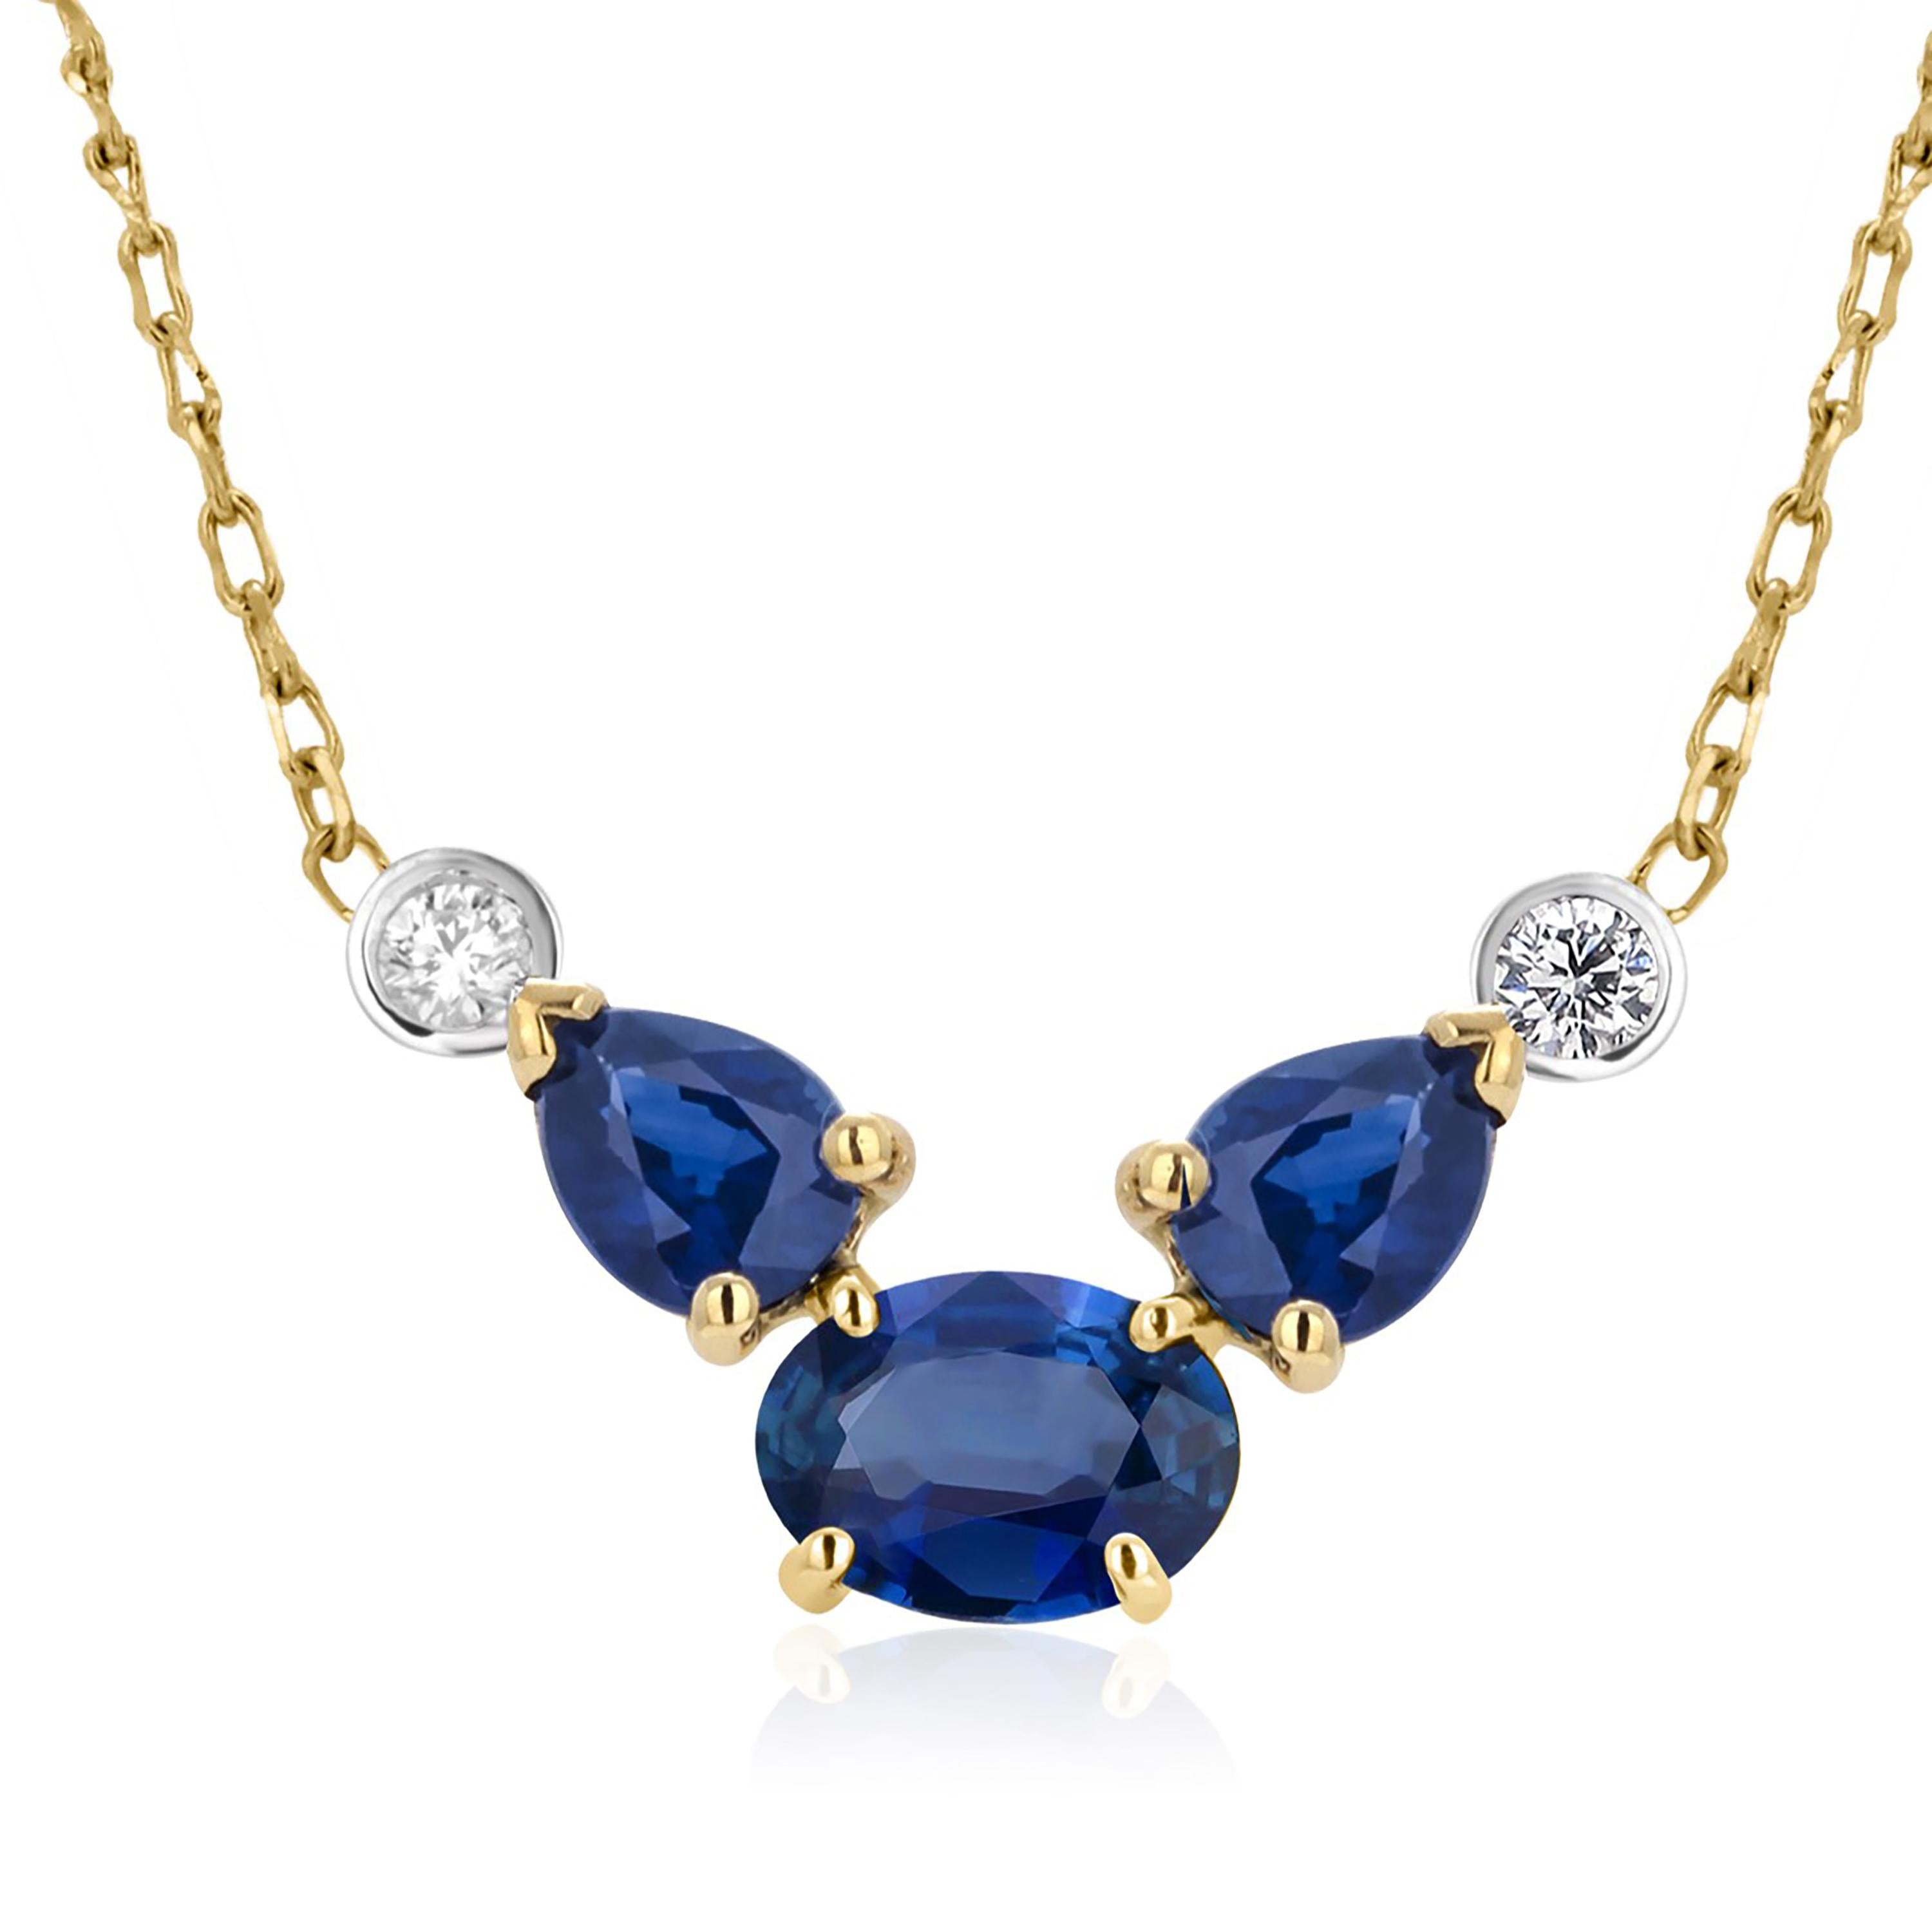 Oval Pear Sapphires Diamonds 2.35 Carat Yellow and White Gold 16.5 Inch Necklace For Sale 3